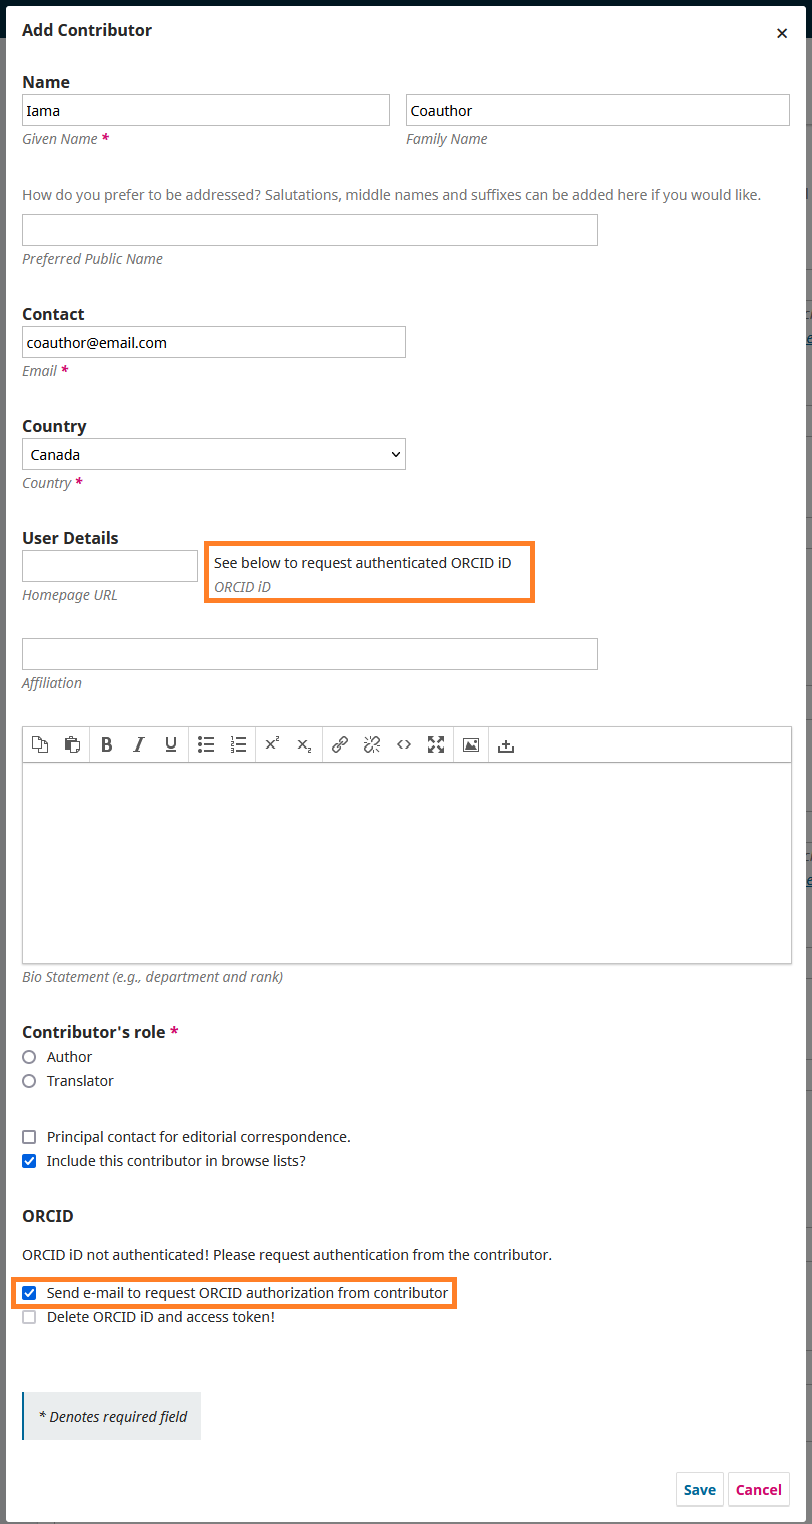 The Add Contributor form with the "Send email to request ORCID authorization from contributor" option enabled.